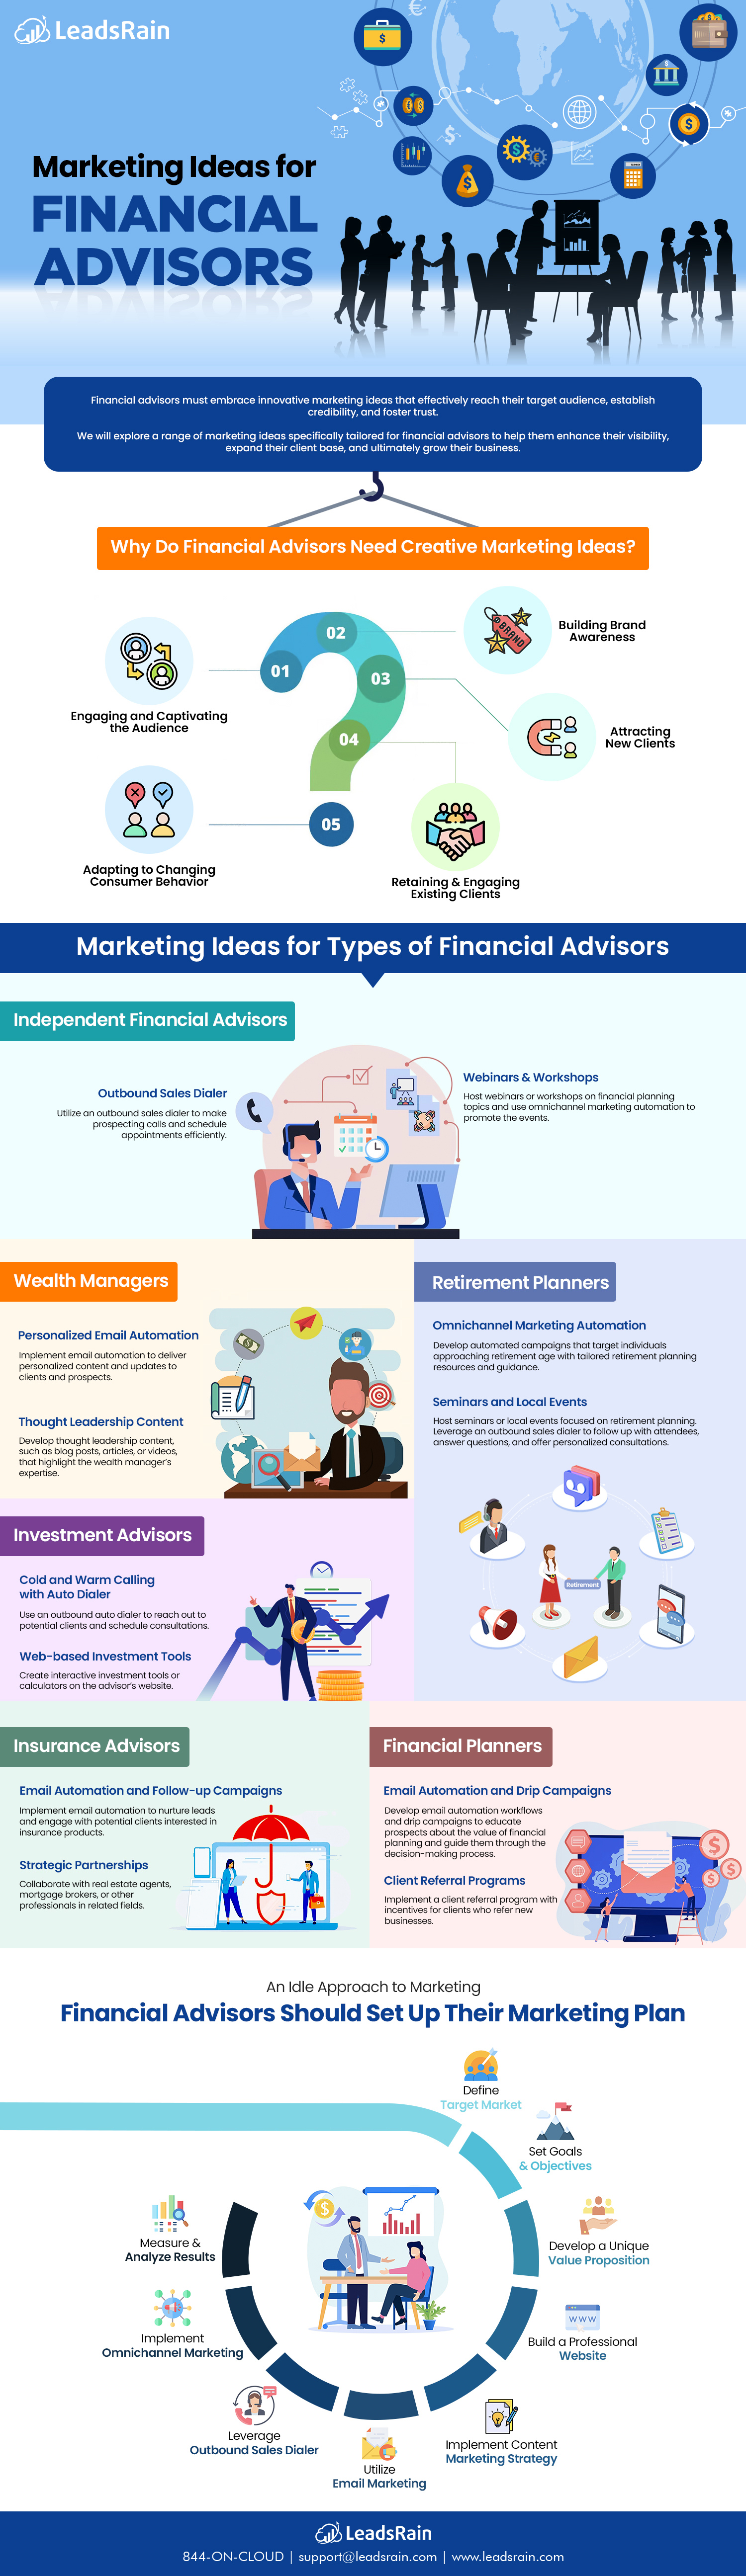 How Financial Advisors Can Ramp-up Business with Creative Marketing Ideas